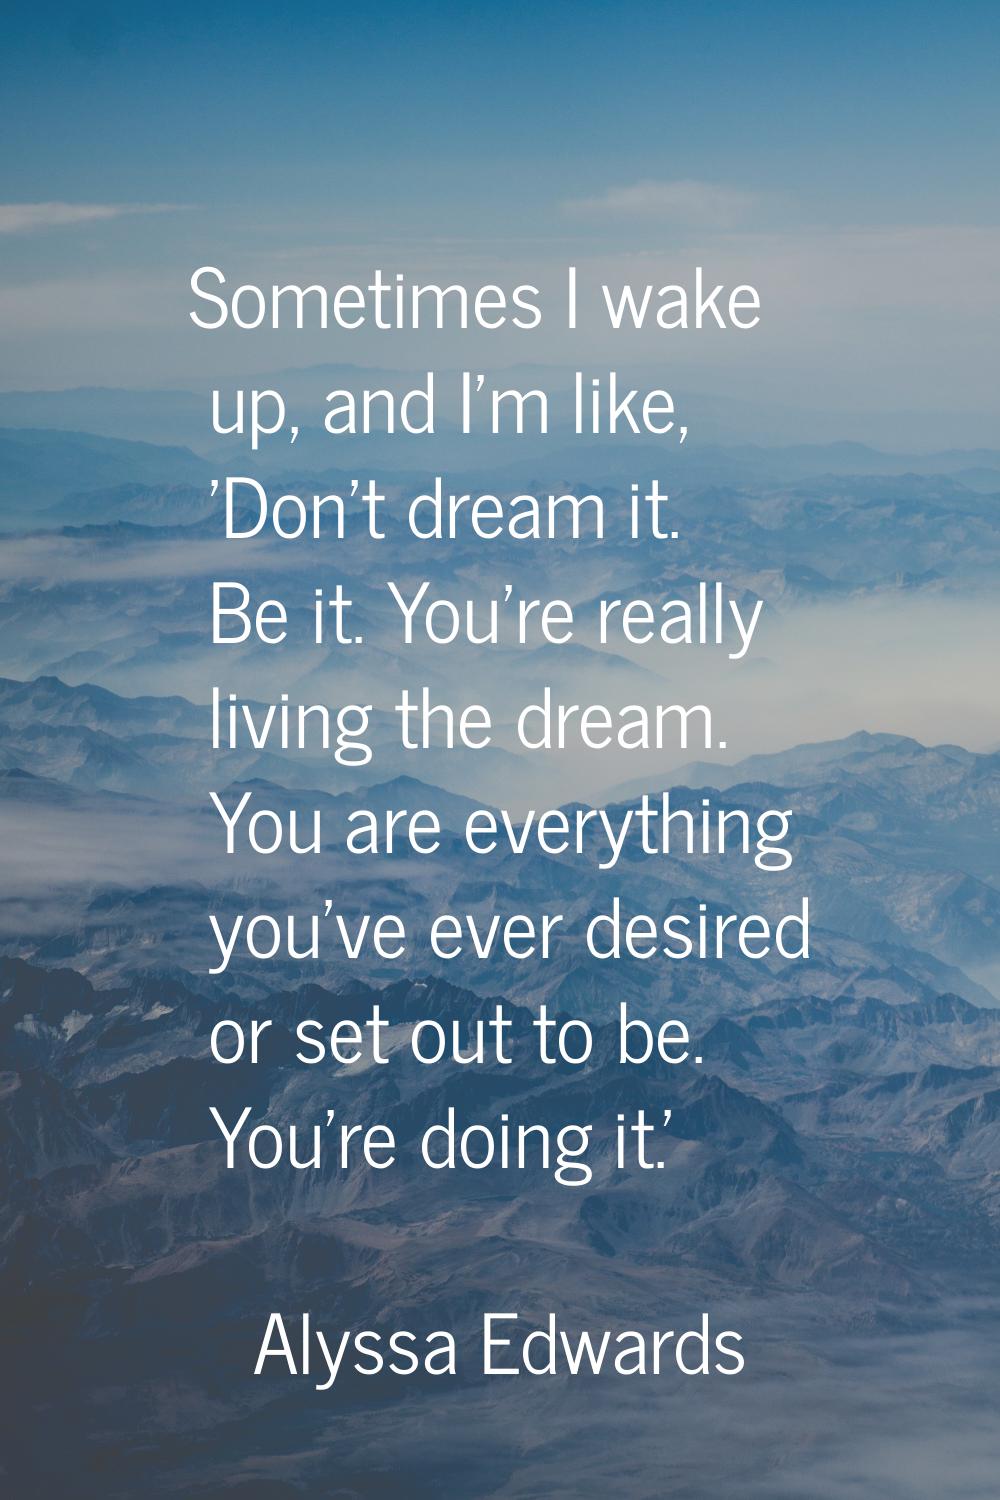 Sometimes I wake up, and I'm like, 'Don't dream it. Be it. You're really living the dream. You are 